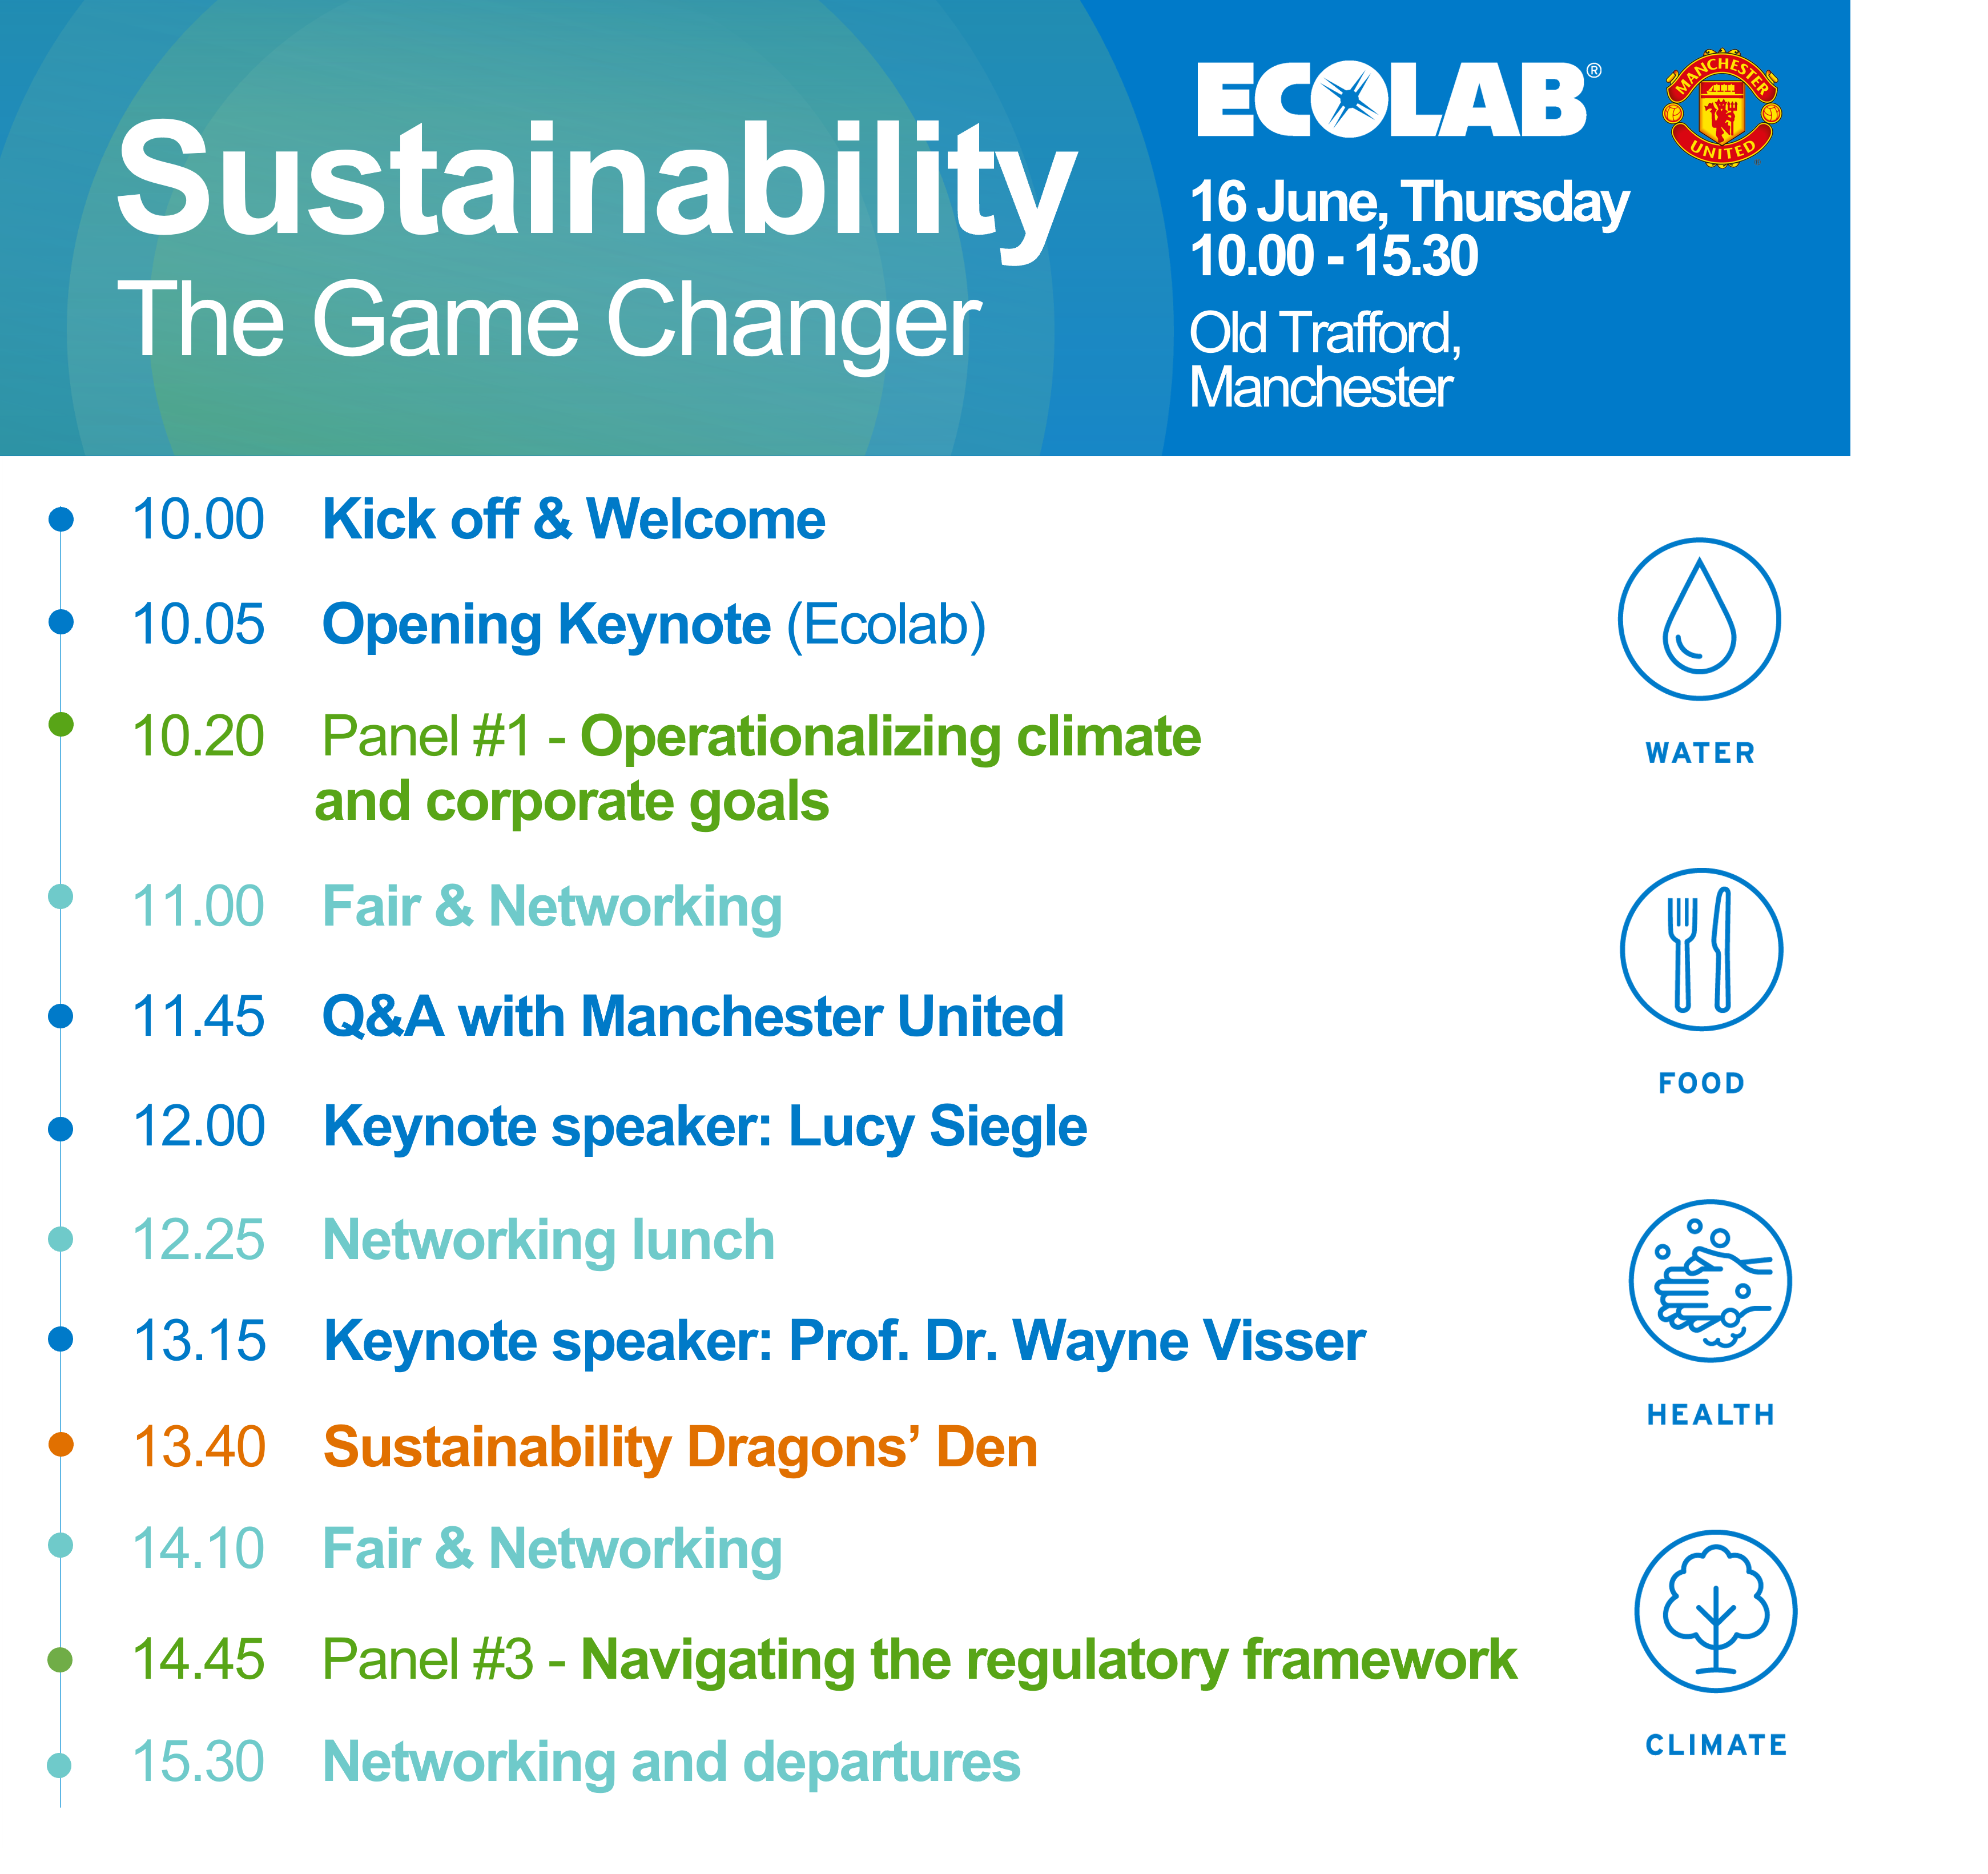 Agenda for the sustainability event